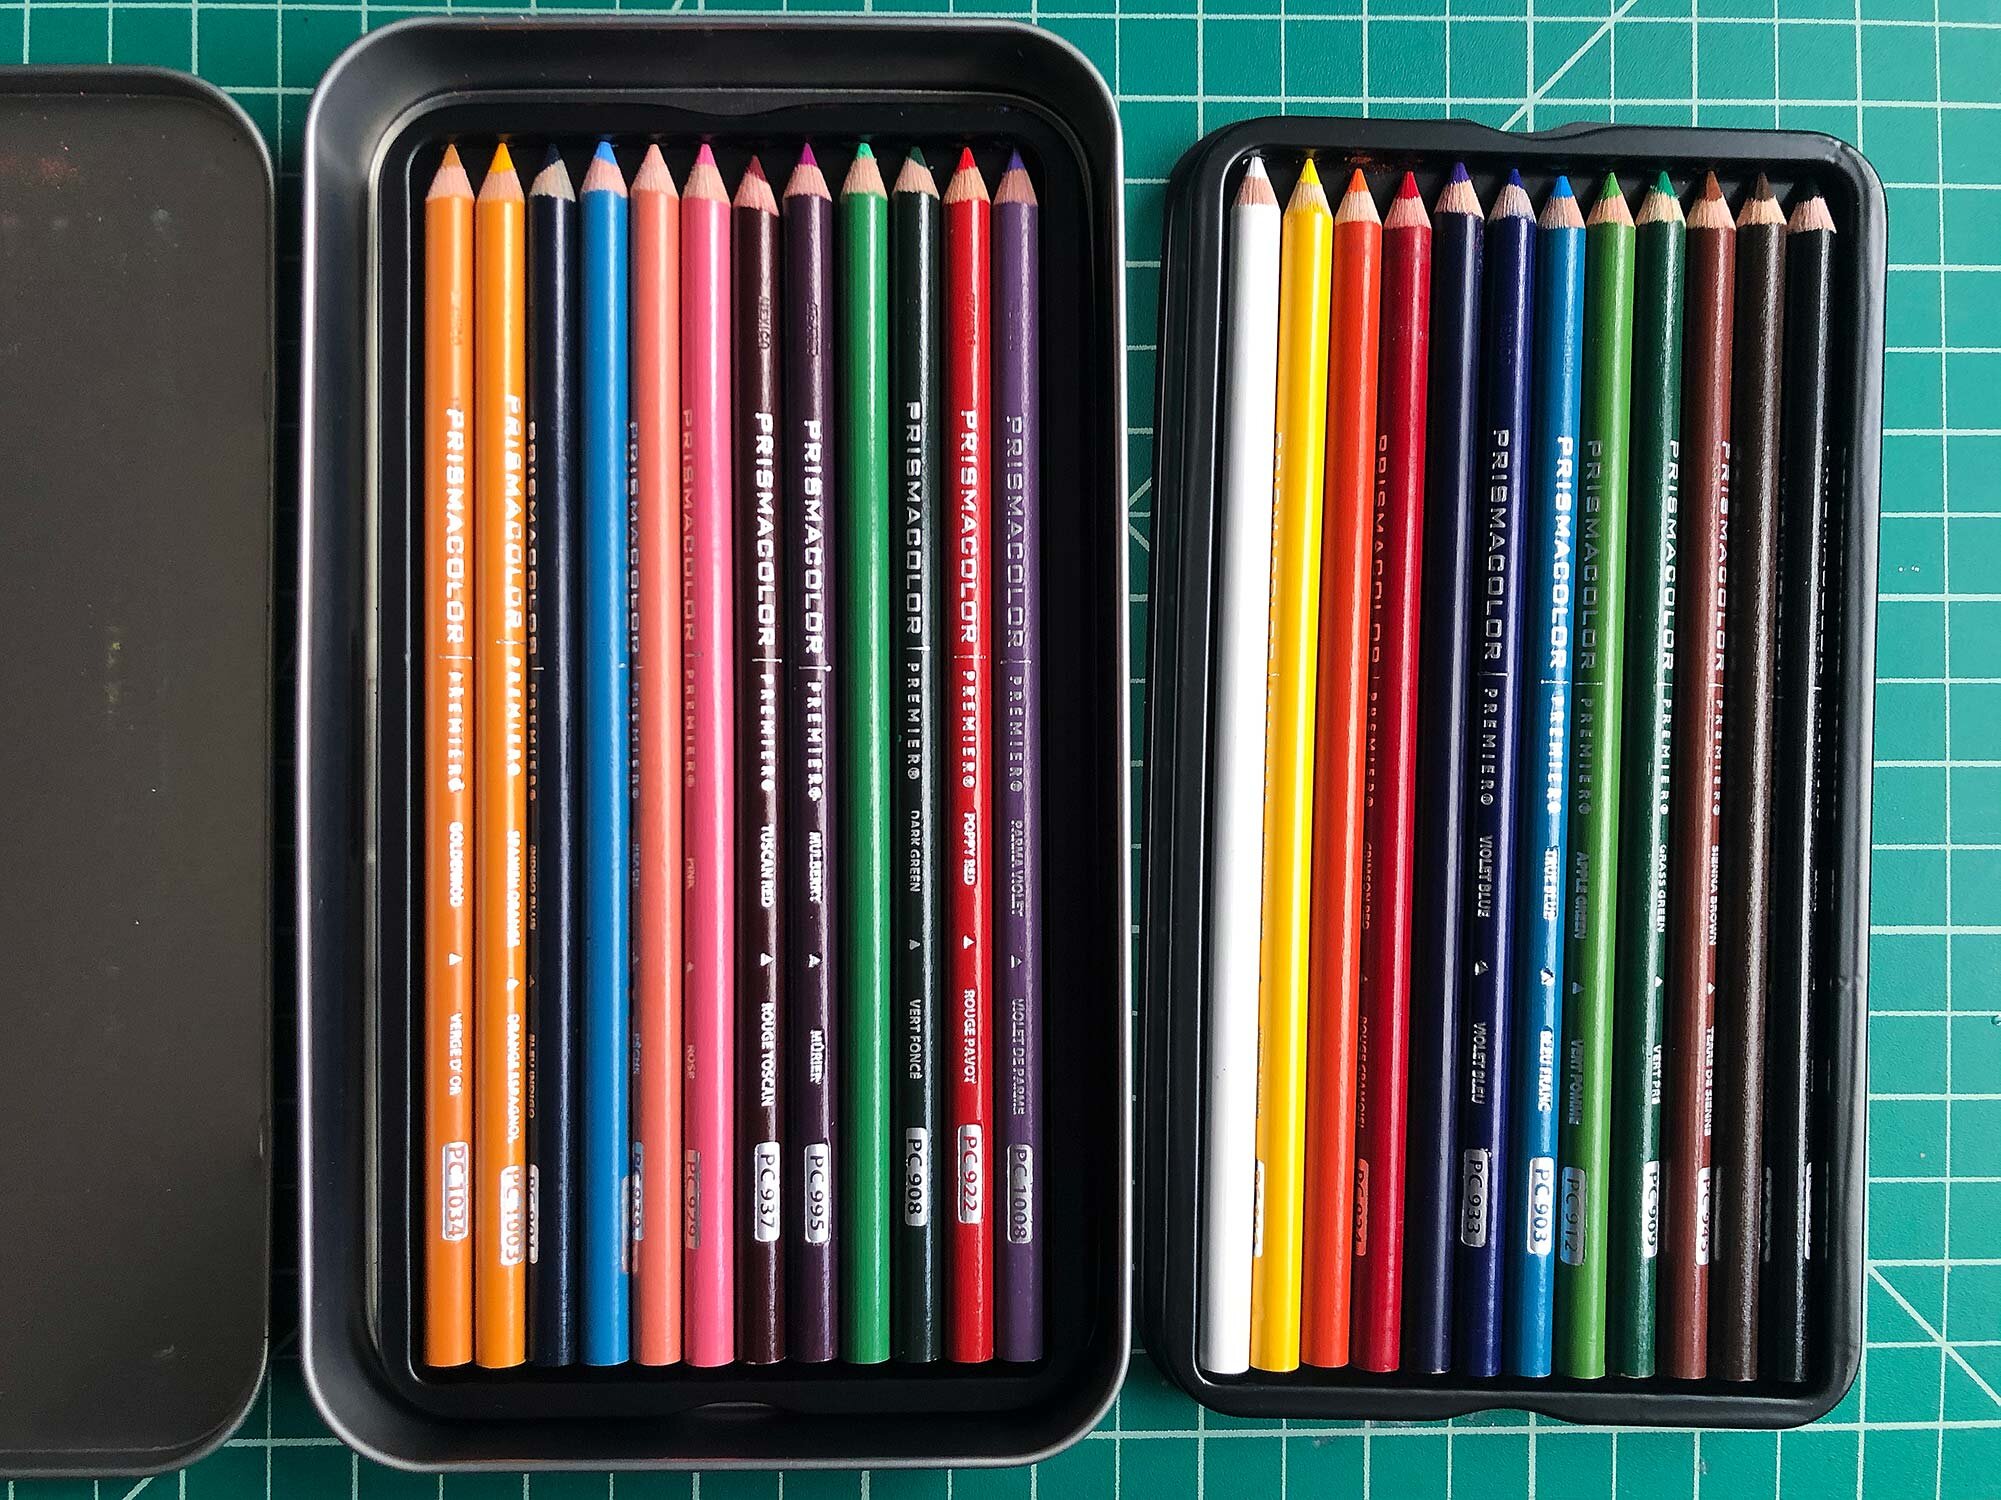 43 colored pencil sets, two sketchbooks with 50 pages, black zipper set,  professional watercolor pencils for adults/children,  professionals/beginners, durable colored art pencils